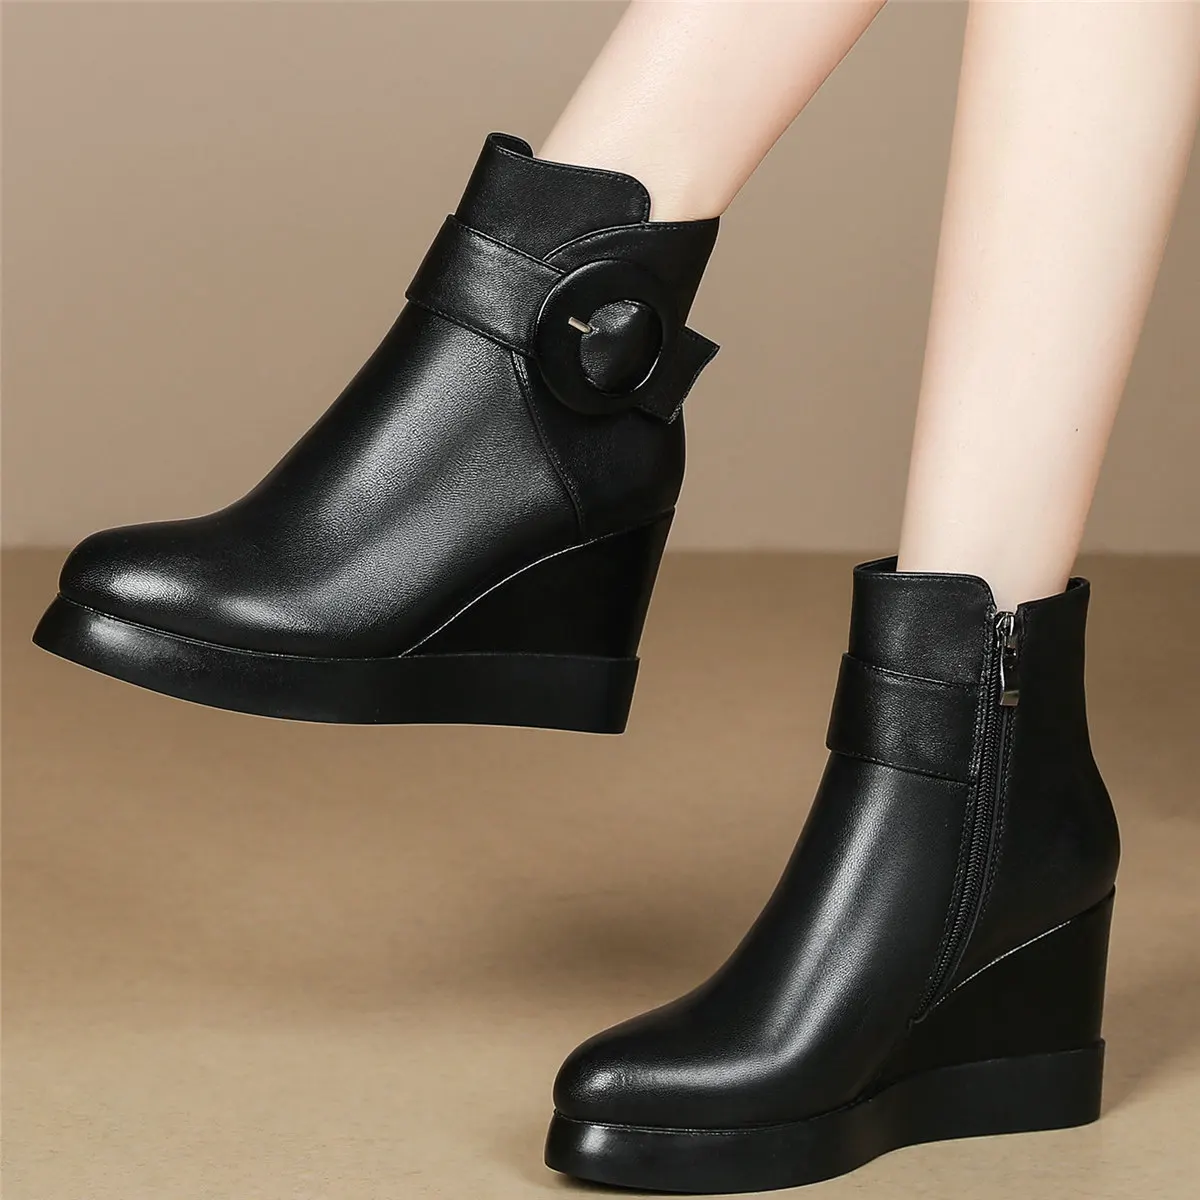 

Winter Platform Pumps Shoes Women Genuine Leather Wedges High Heel Ankle Boots Female Pointed Toe Fashion Sneakers Casual Shoes